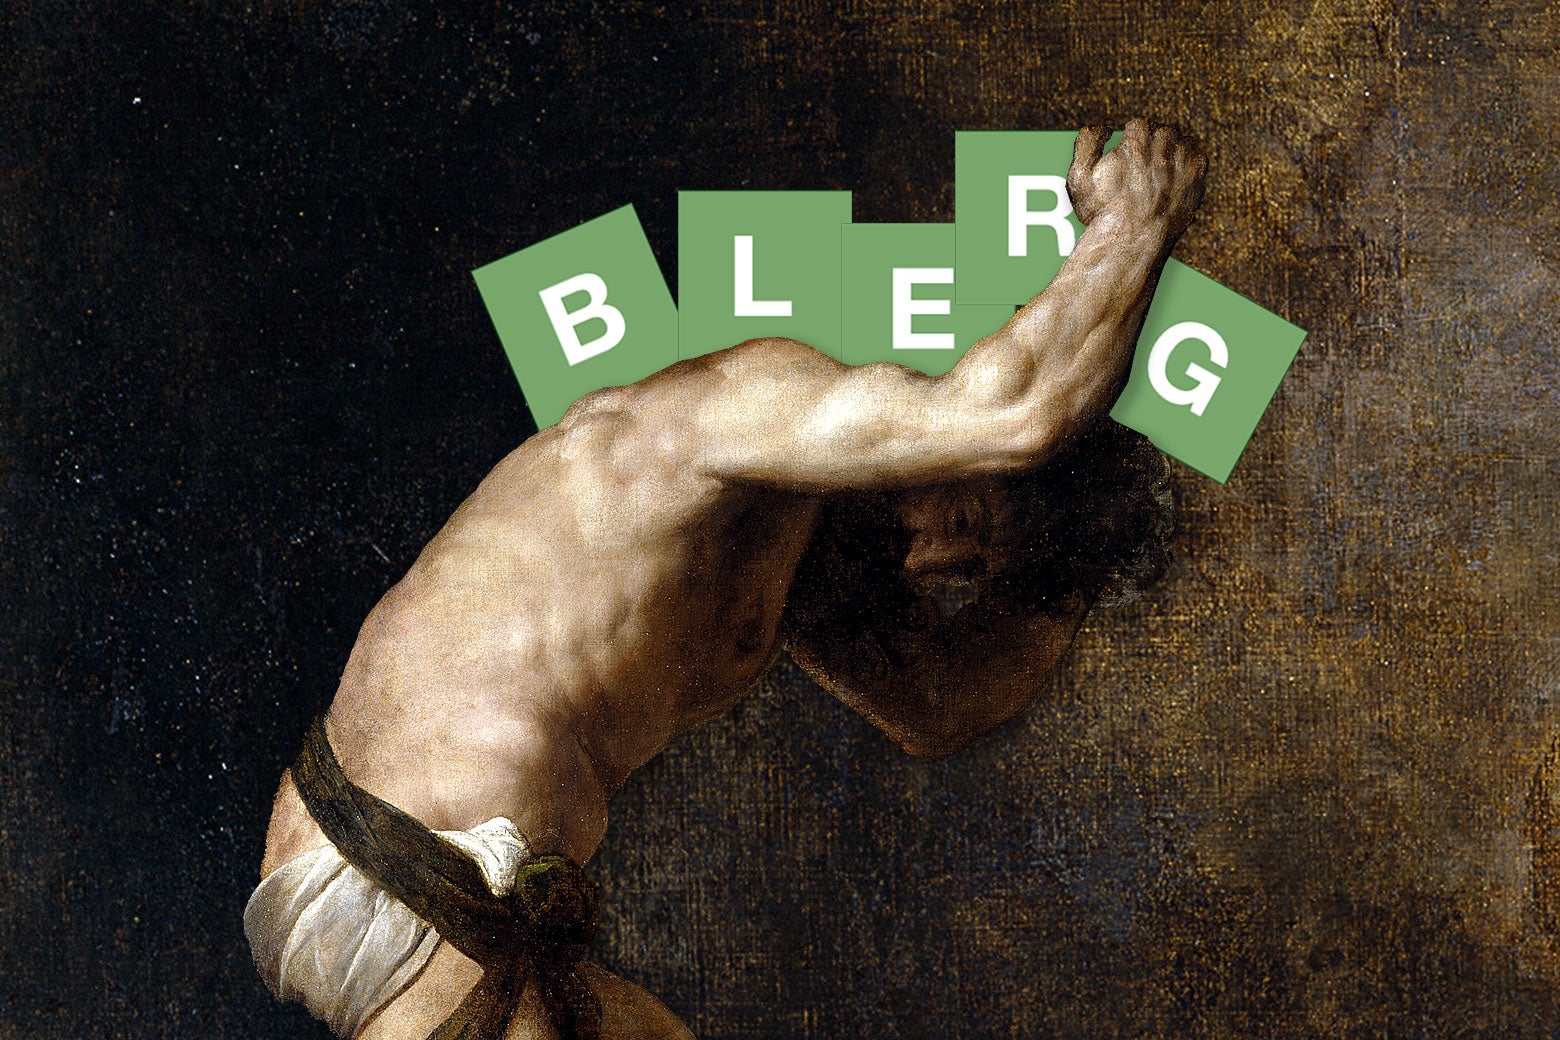 Sisyphus carrying Wordle blocks spelling out "BLERG" on his back.